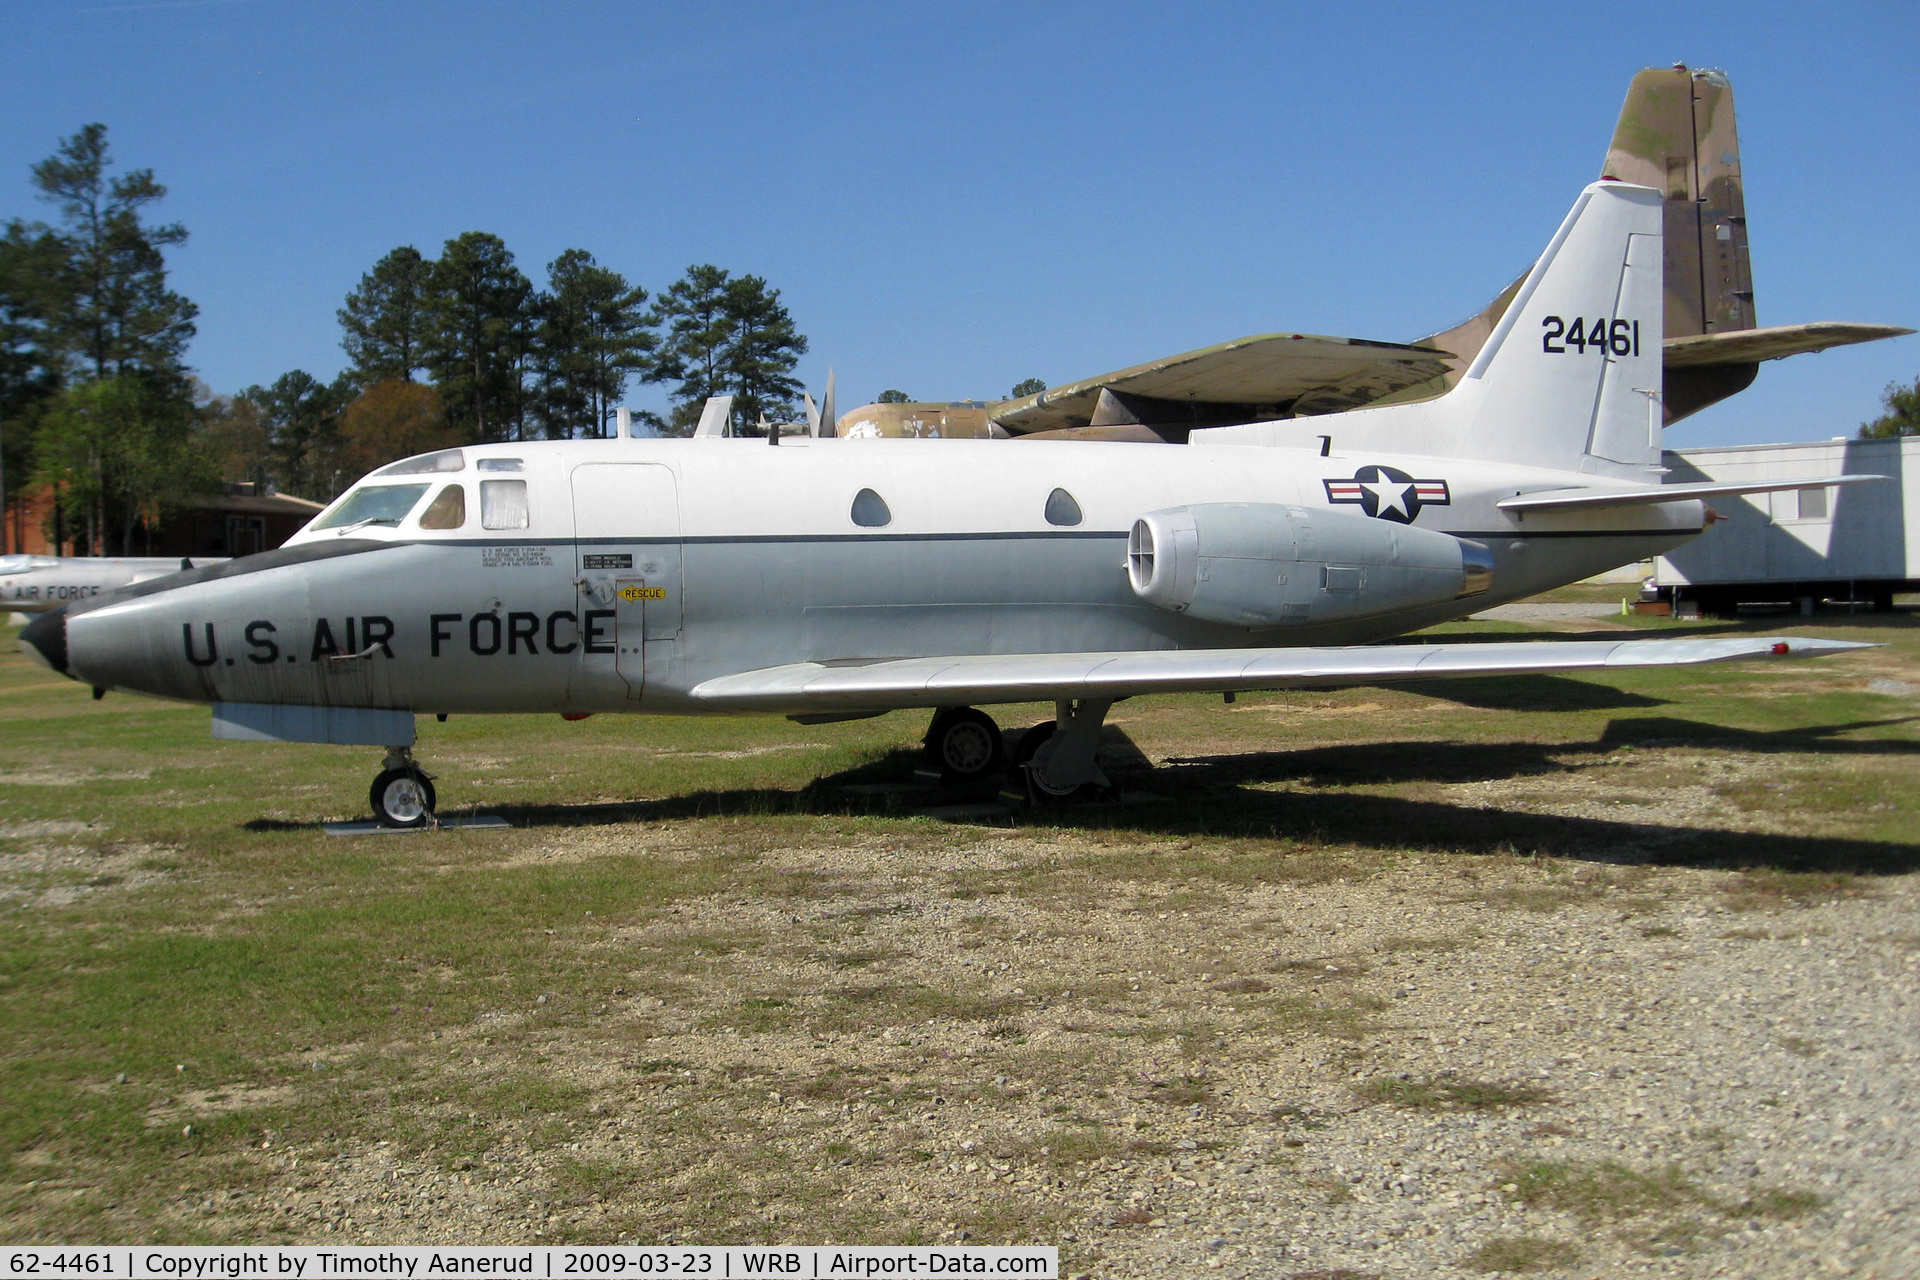 62-4461, 1962 North American CT-39A Sabreliner C/N 276-14, Museum of Aviation, Robins AFB